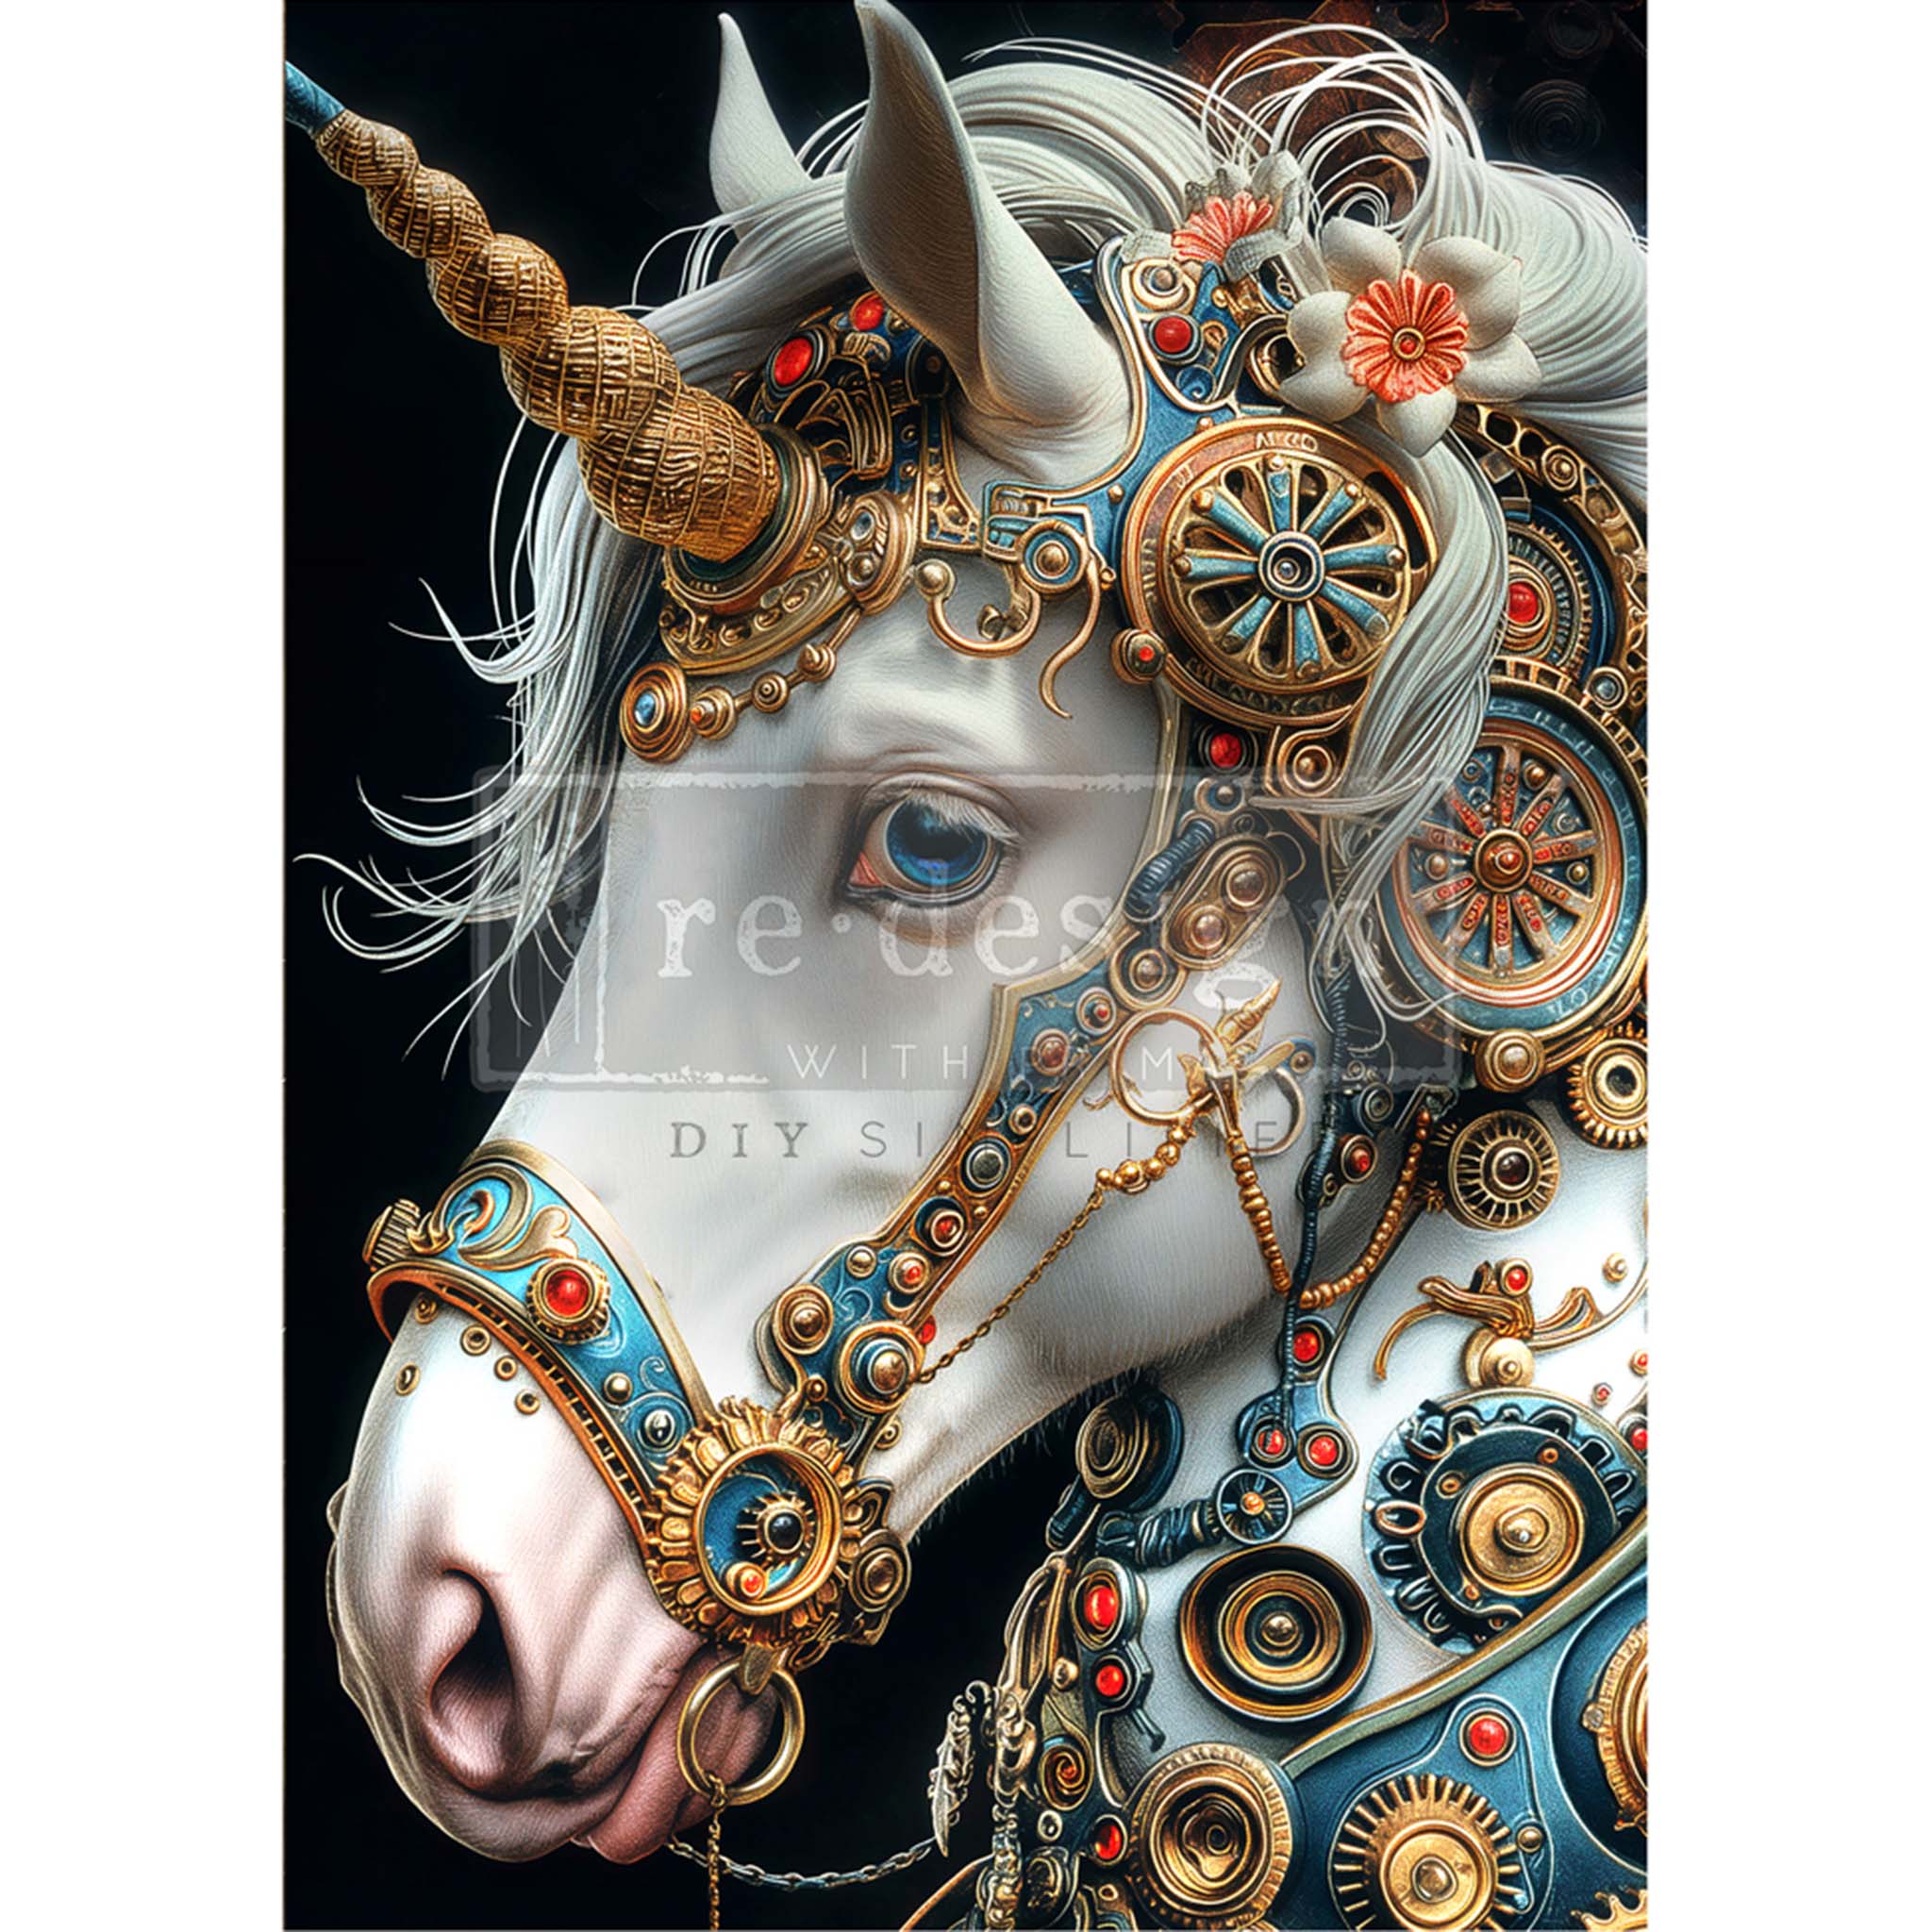 A1 fiber paper design that features a white steampunk unicorn, adorned with gears and cogs. White borders are on the sides.